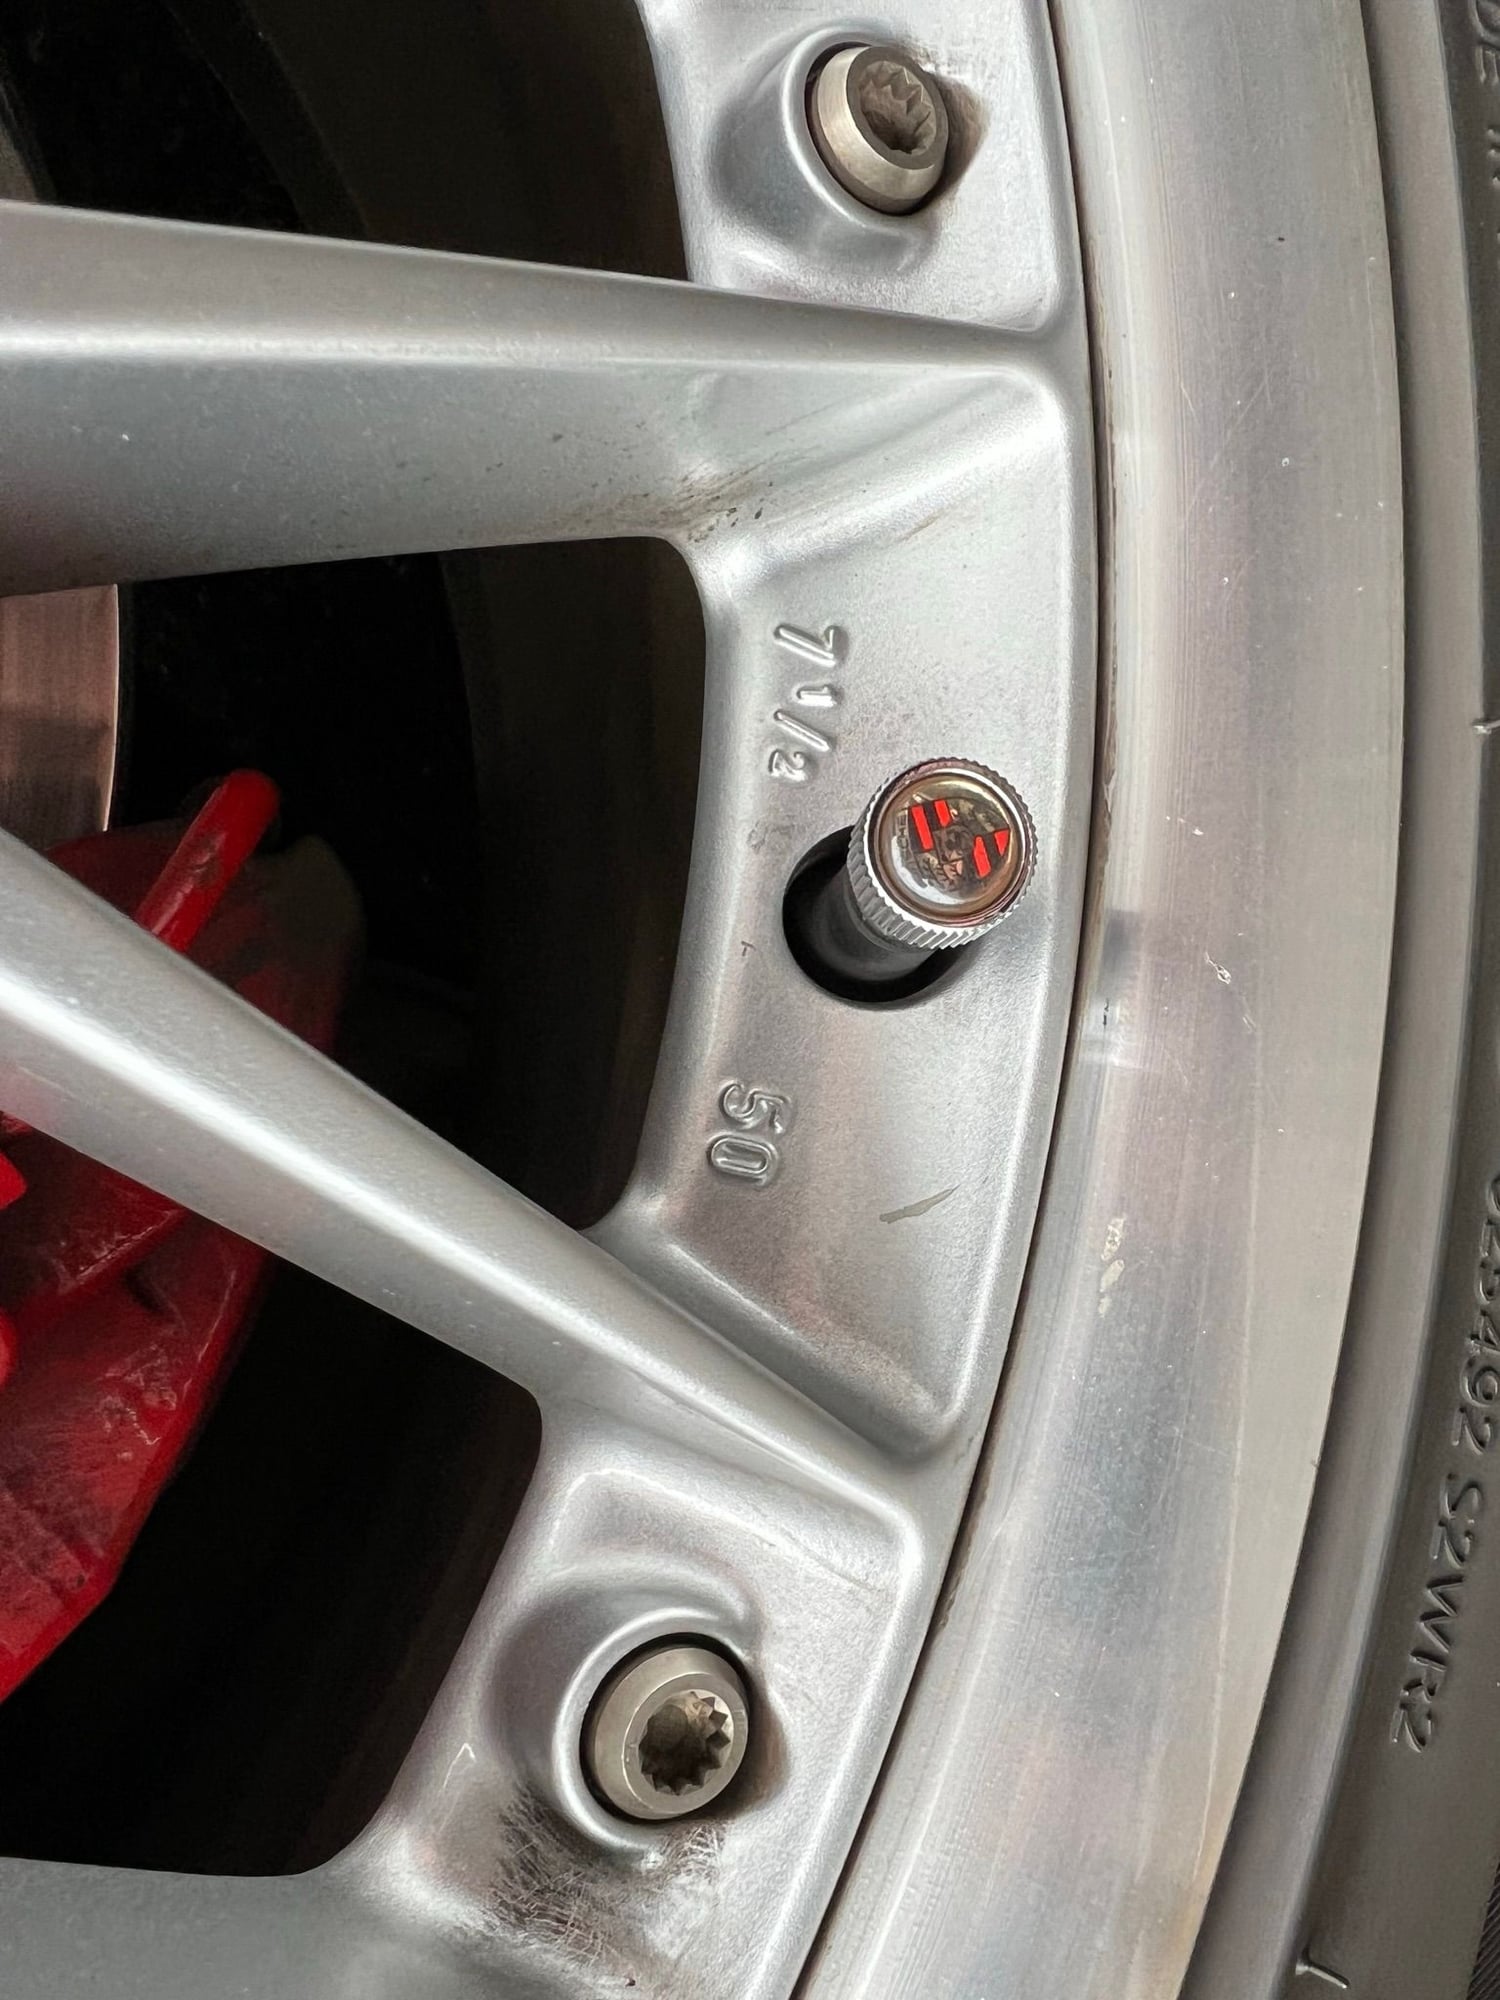 Wheels and Tires/Axles - For Sale: 18 in Sport Classic II (BBS) Boxster / 996 Wheels - Used - 1997 to 2004 Porsche Boxster - Hinsdale, IL 60521, United States